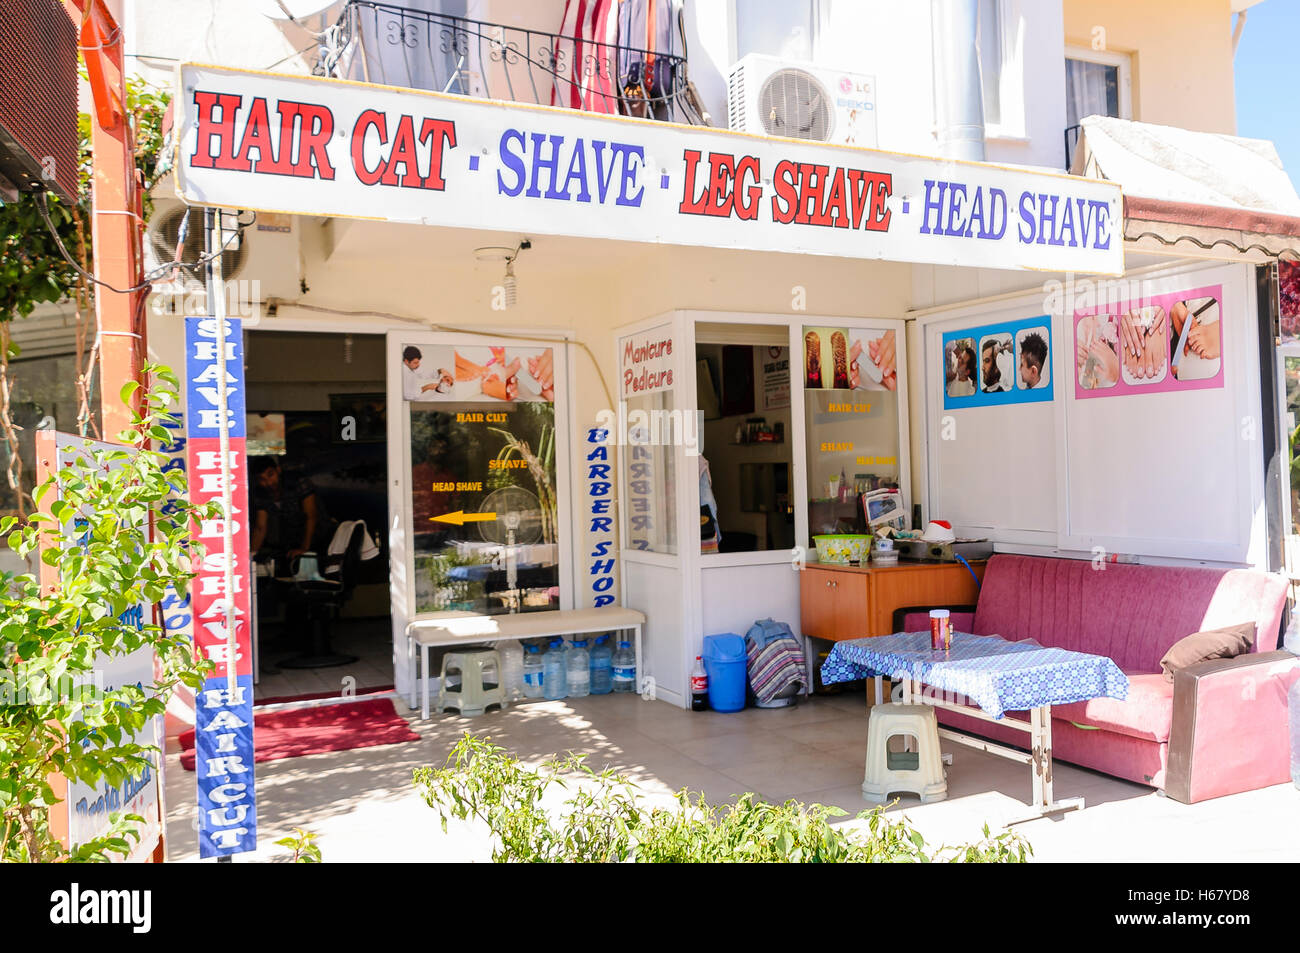 Turkish barbers with a sign saying 'Hair Cat' instead of 'Hair Cut' spelling error mistake Stock Photo